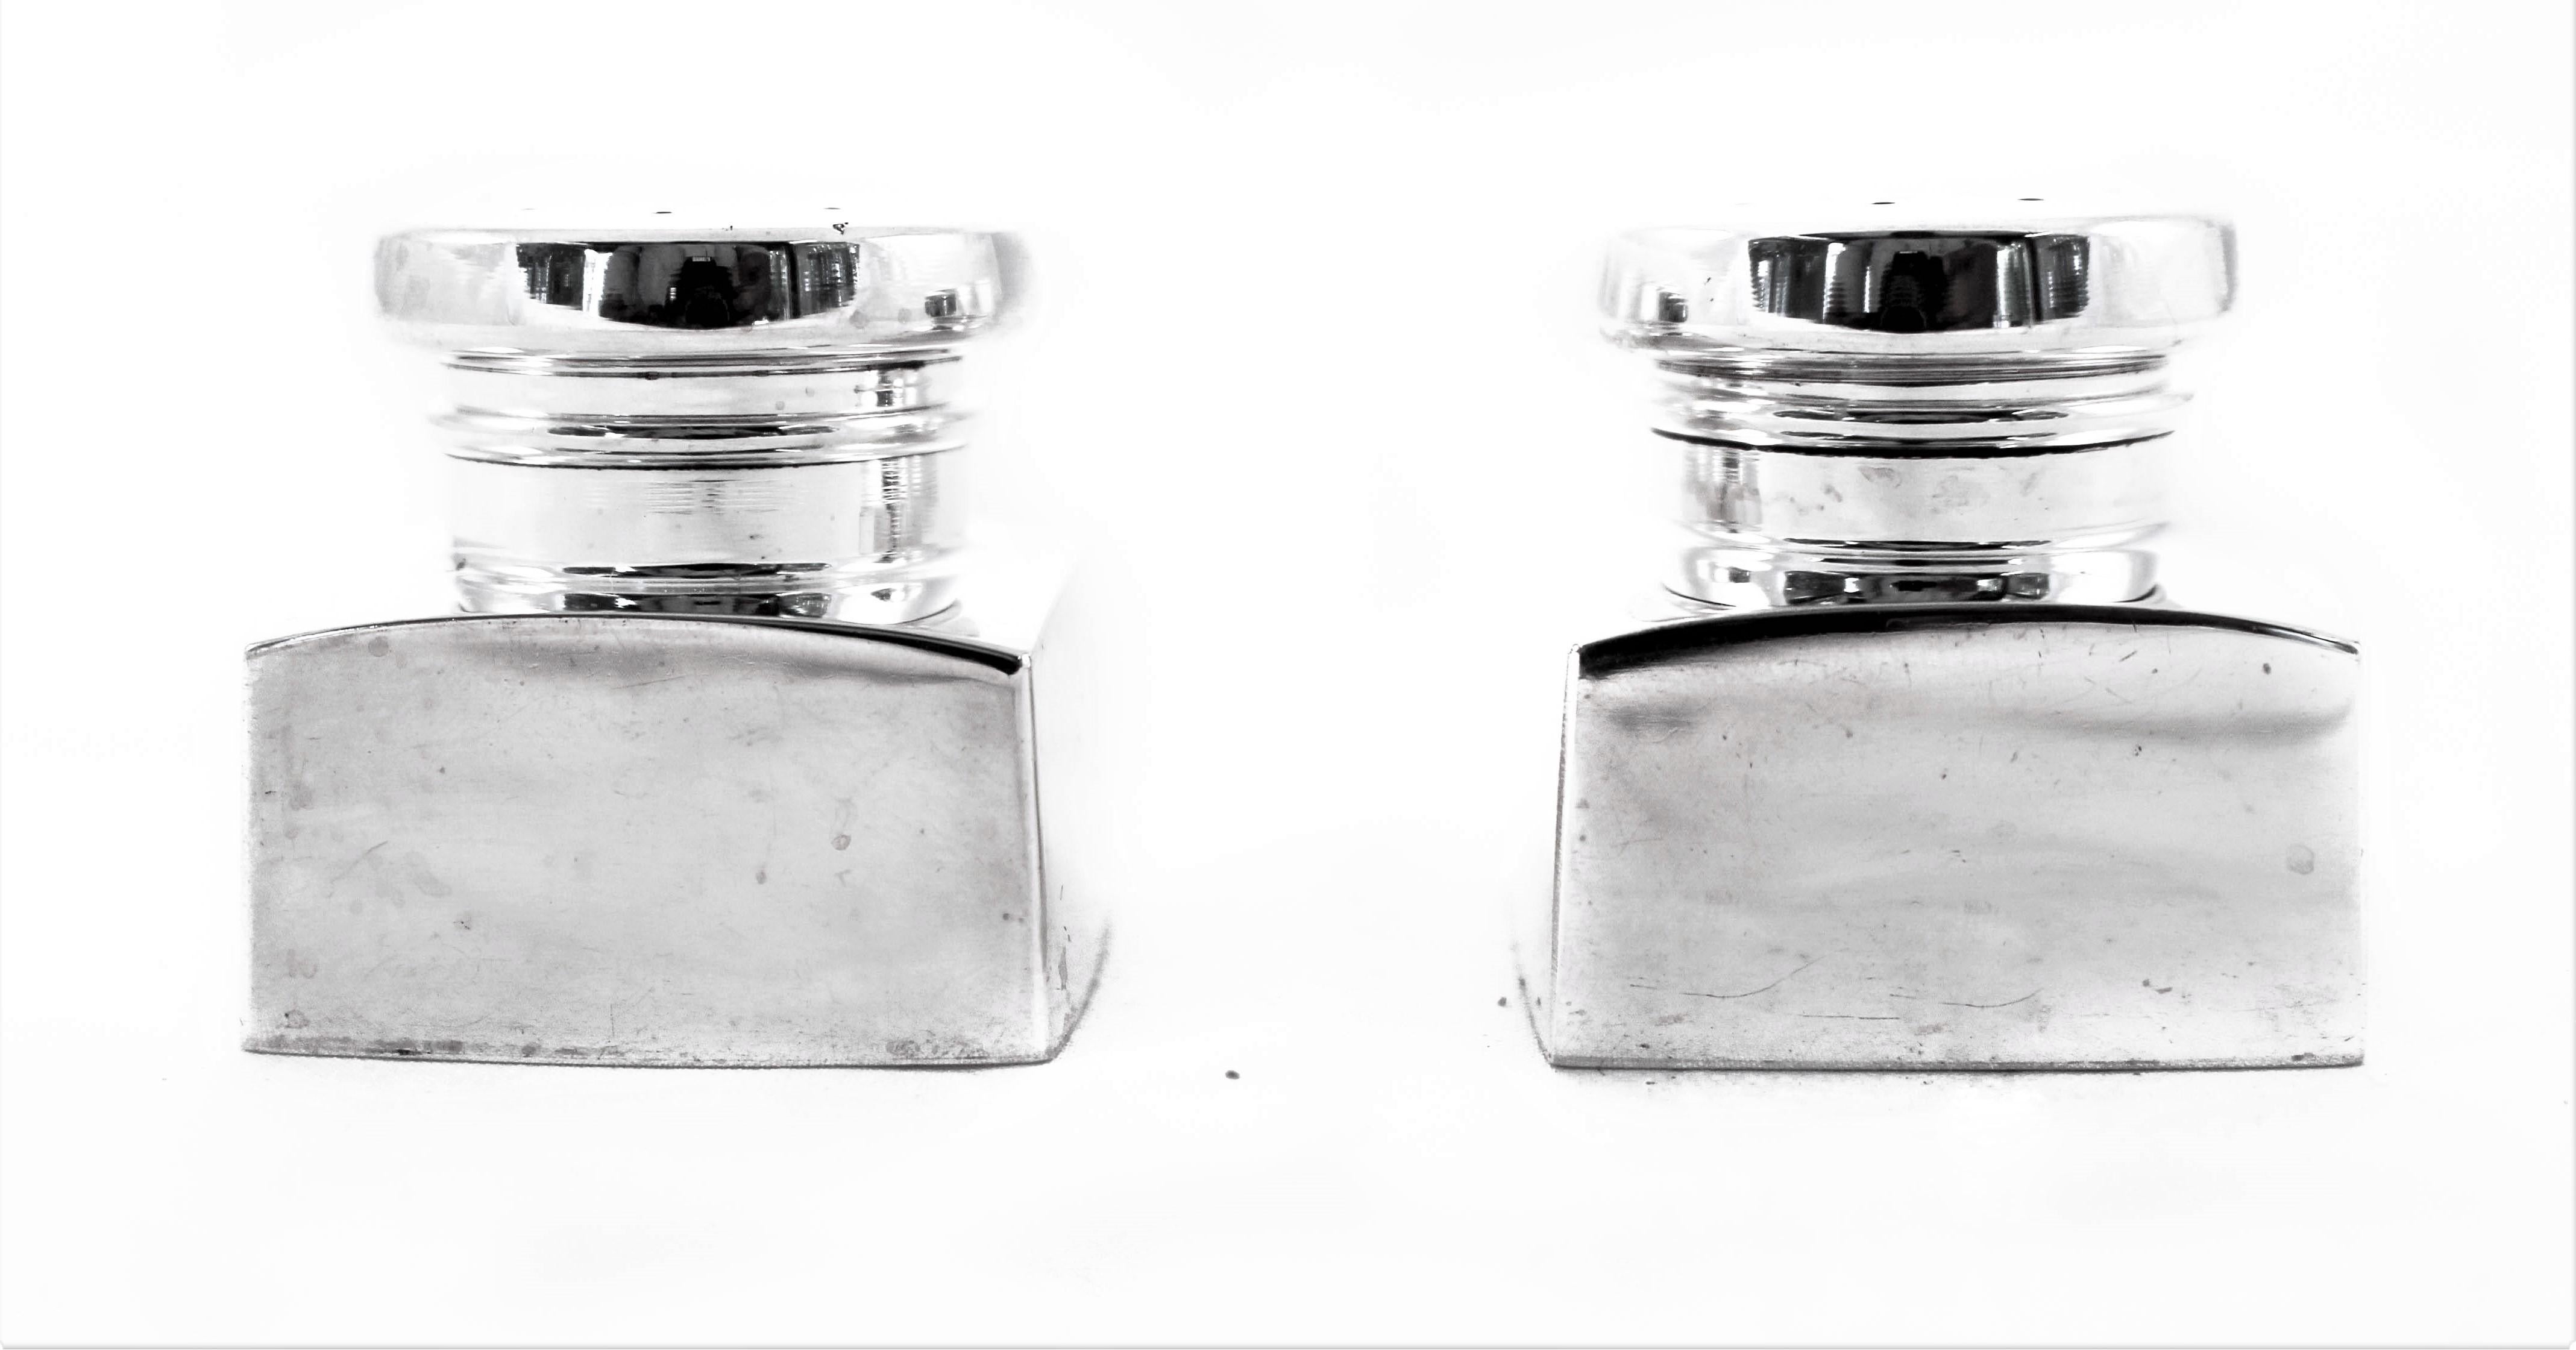 Uber-modern and uber-chic, this pair of salt and pepper shakers has that midcentury look that is so popular. A square shape body topped with a round cover. There are no etchings or decoration on them, just the clean look of sterling silver.
 